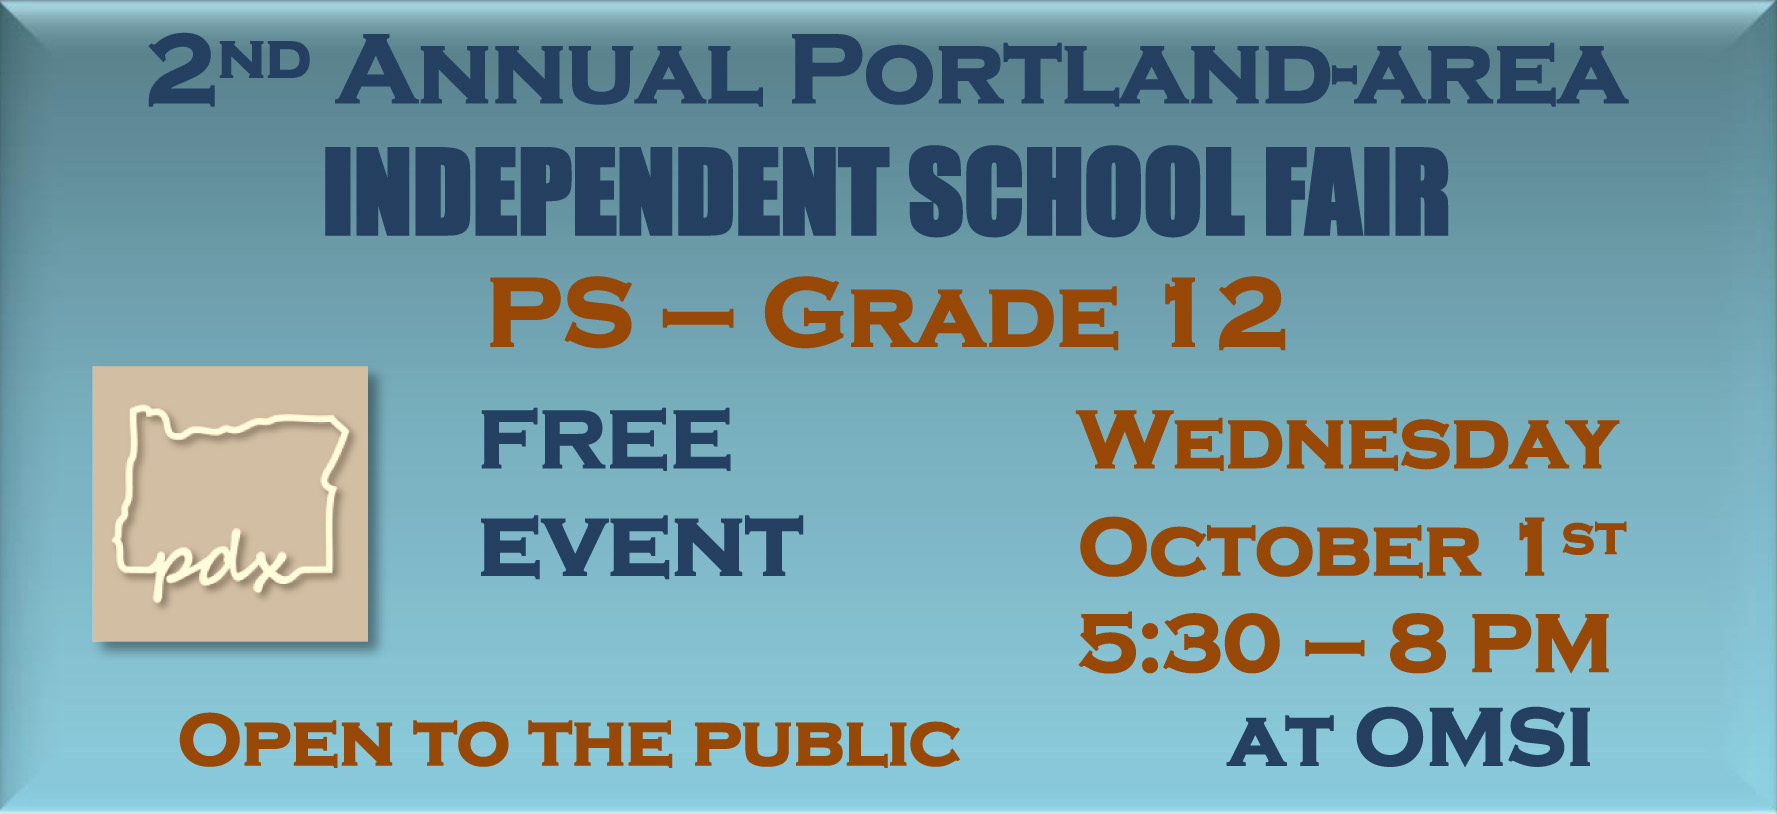 Independent School Fair at OMSI graphic